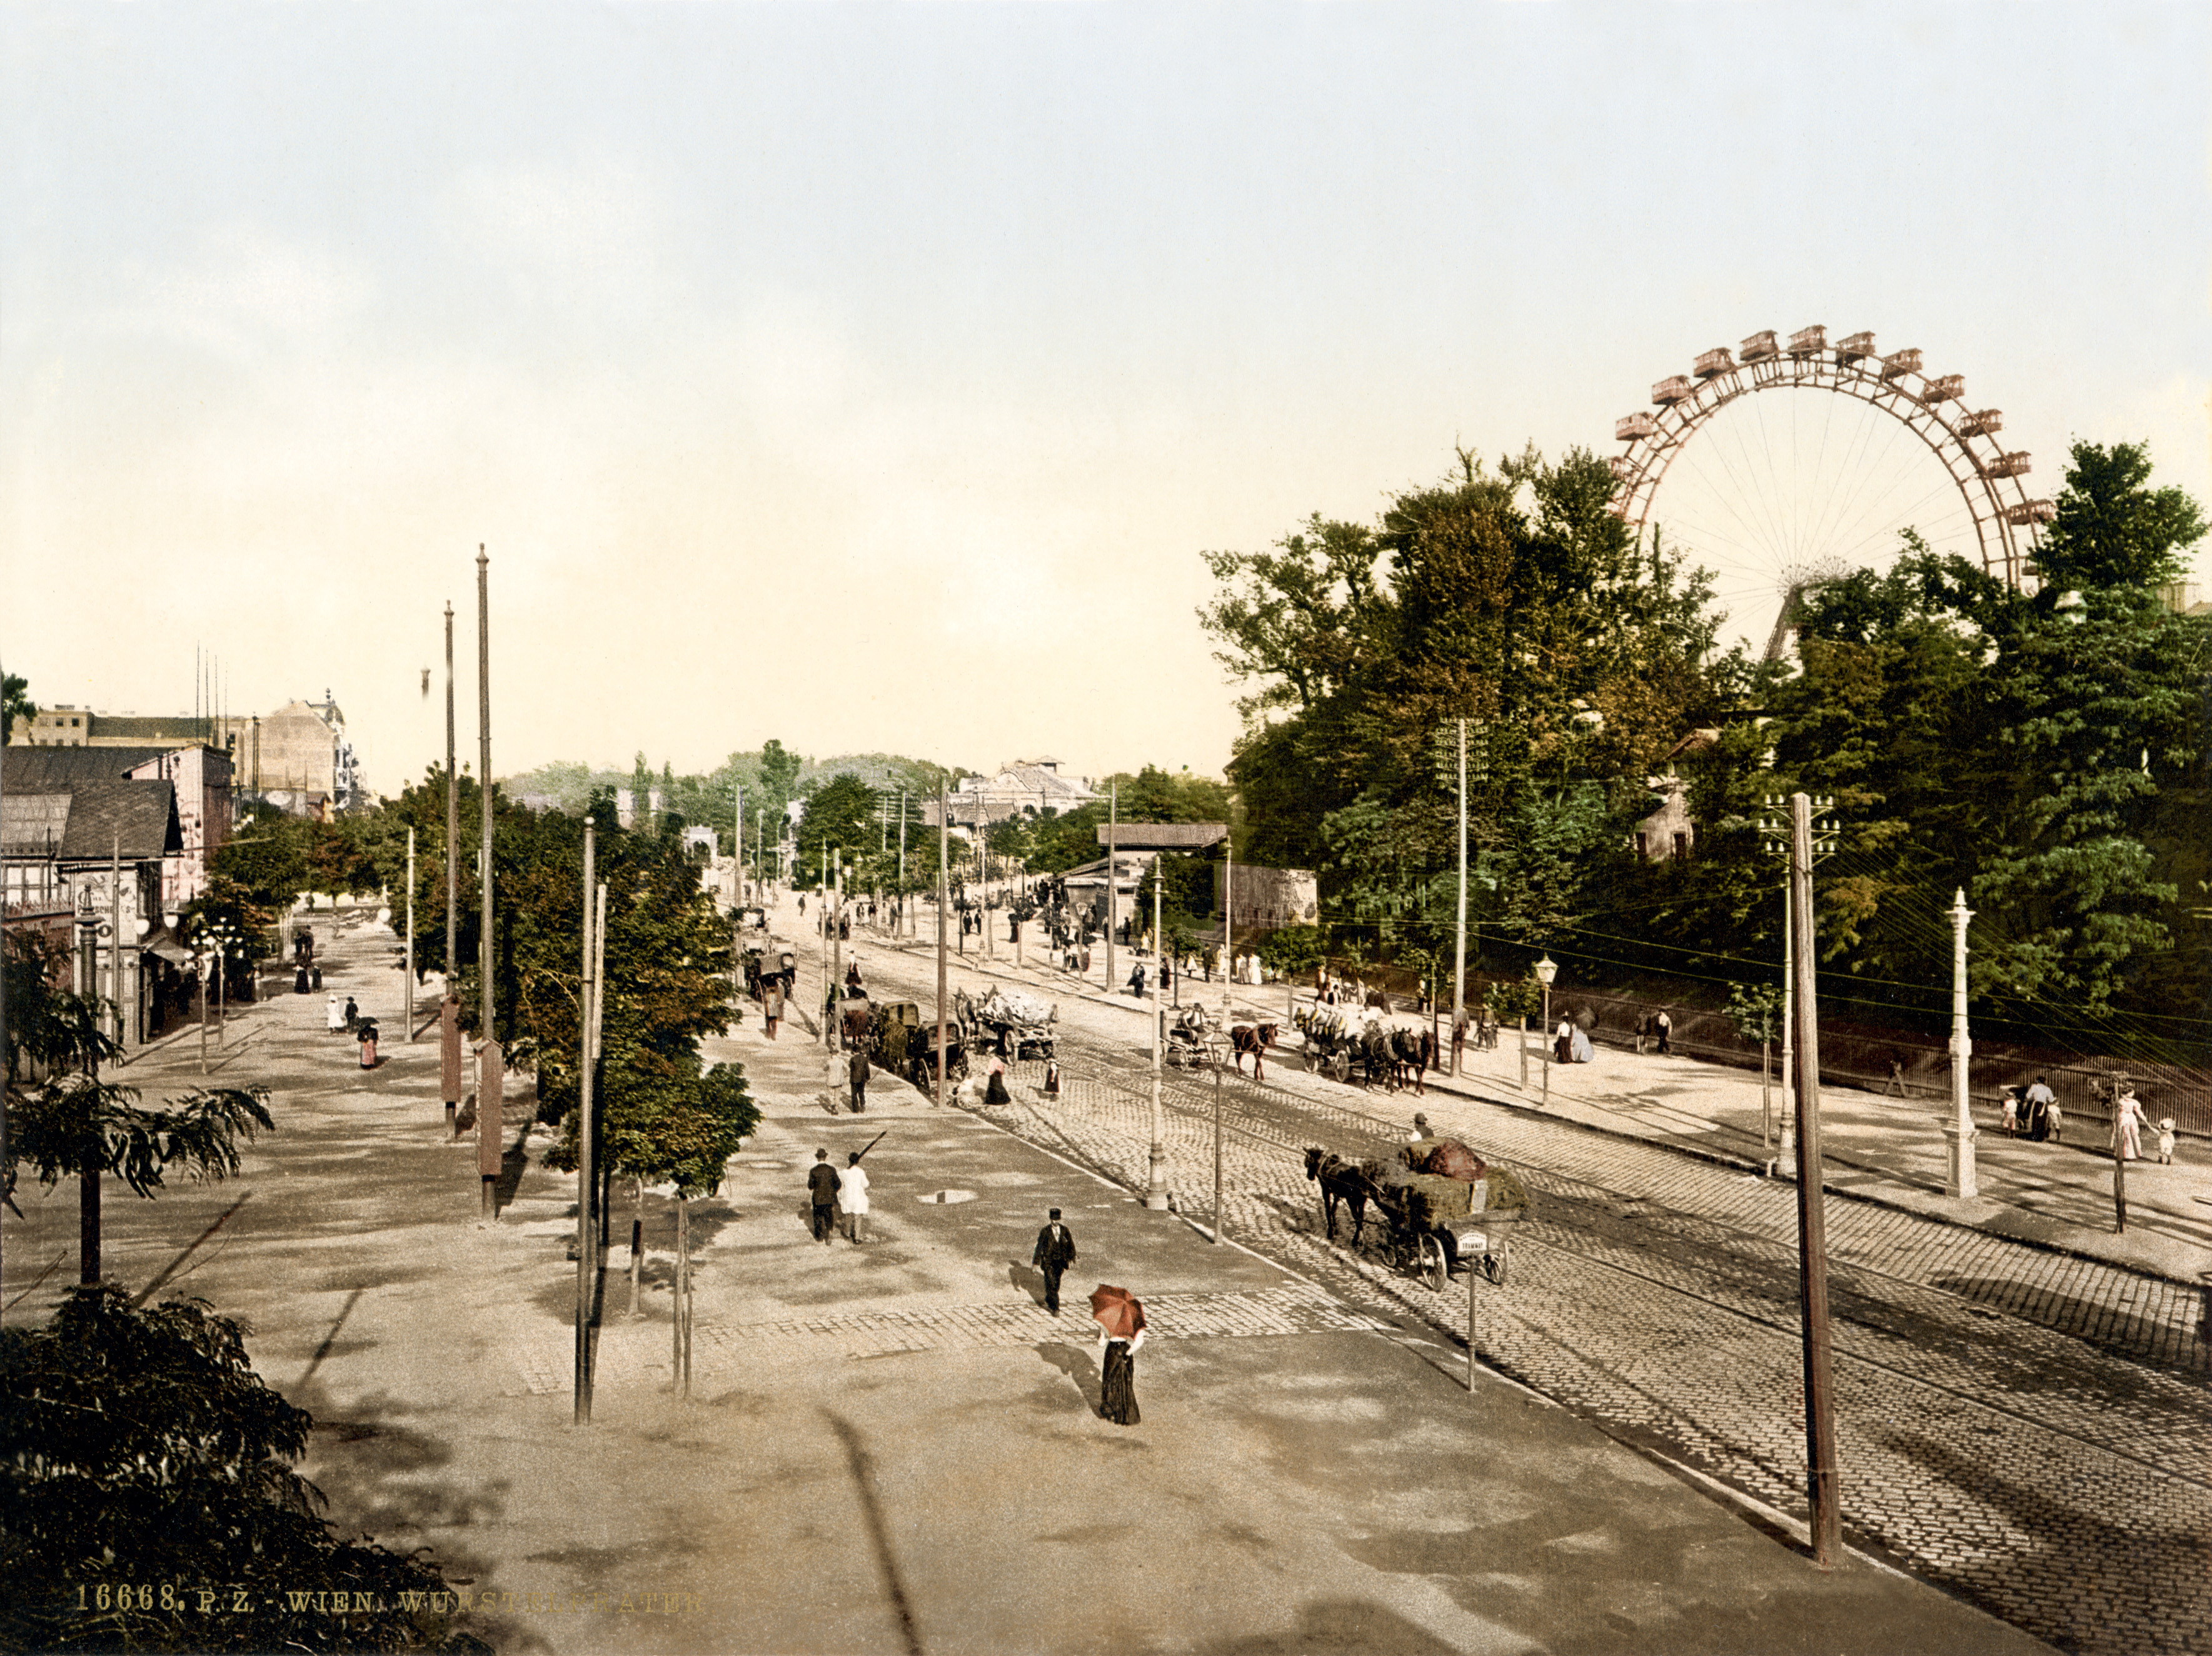 Flickr - …trialsanderrors - The Wurstelprater, Vienna, Austria-Hungary, ca. 1895 - Photochrom print by Photoglob Zürich, between 1890 and 1900.
From the Photochrom Prints Collection at the Library of Congress
More photochroms from Austria-Hungary | More photochrom prints

[PD] This picture is in the public domain